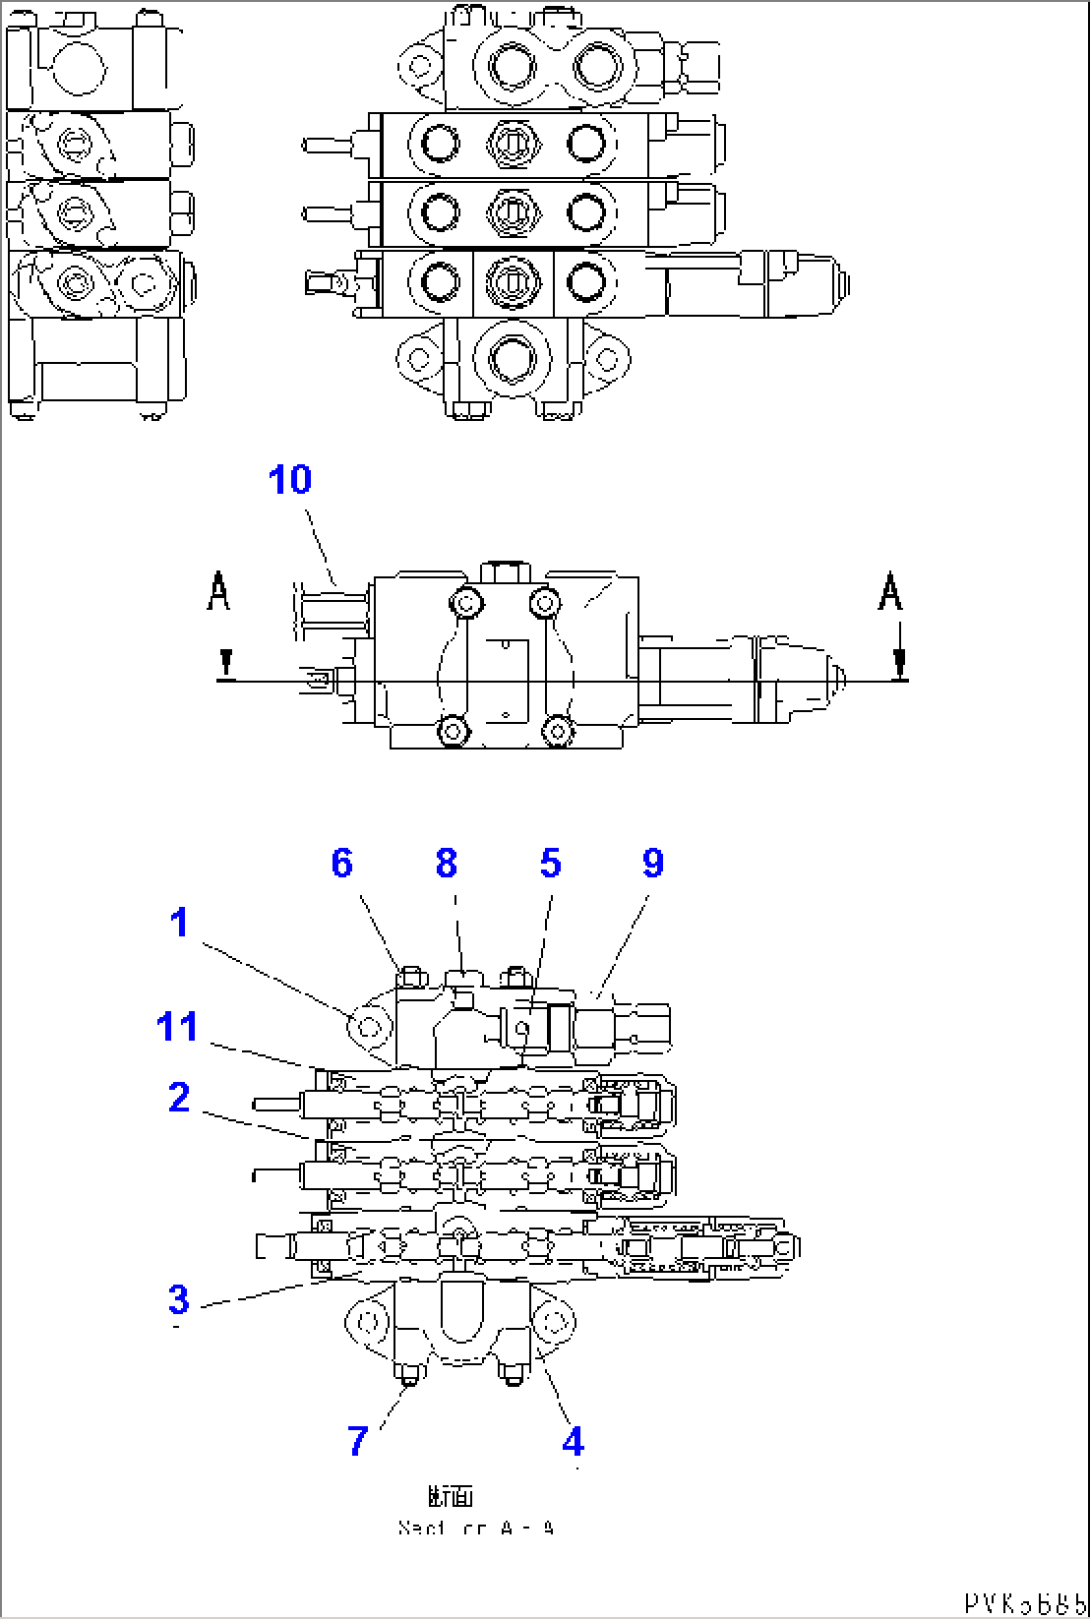 MAIN VALVE (WITH BACK HOE)(#80199-)